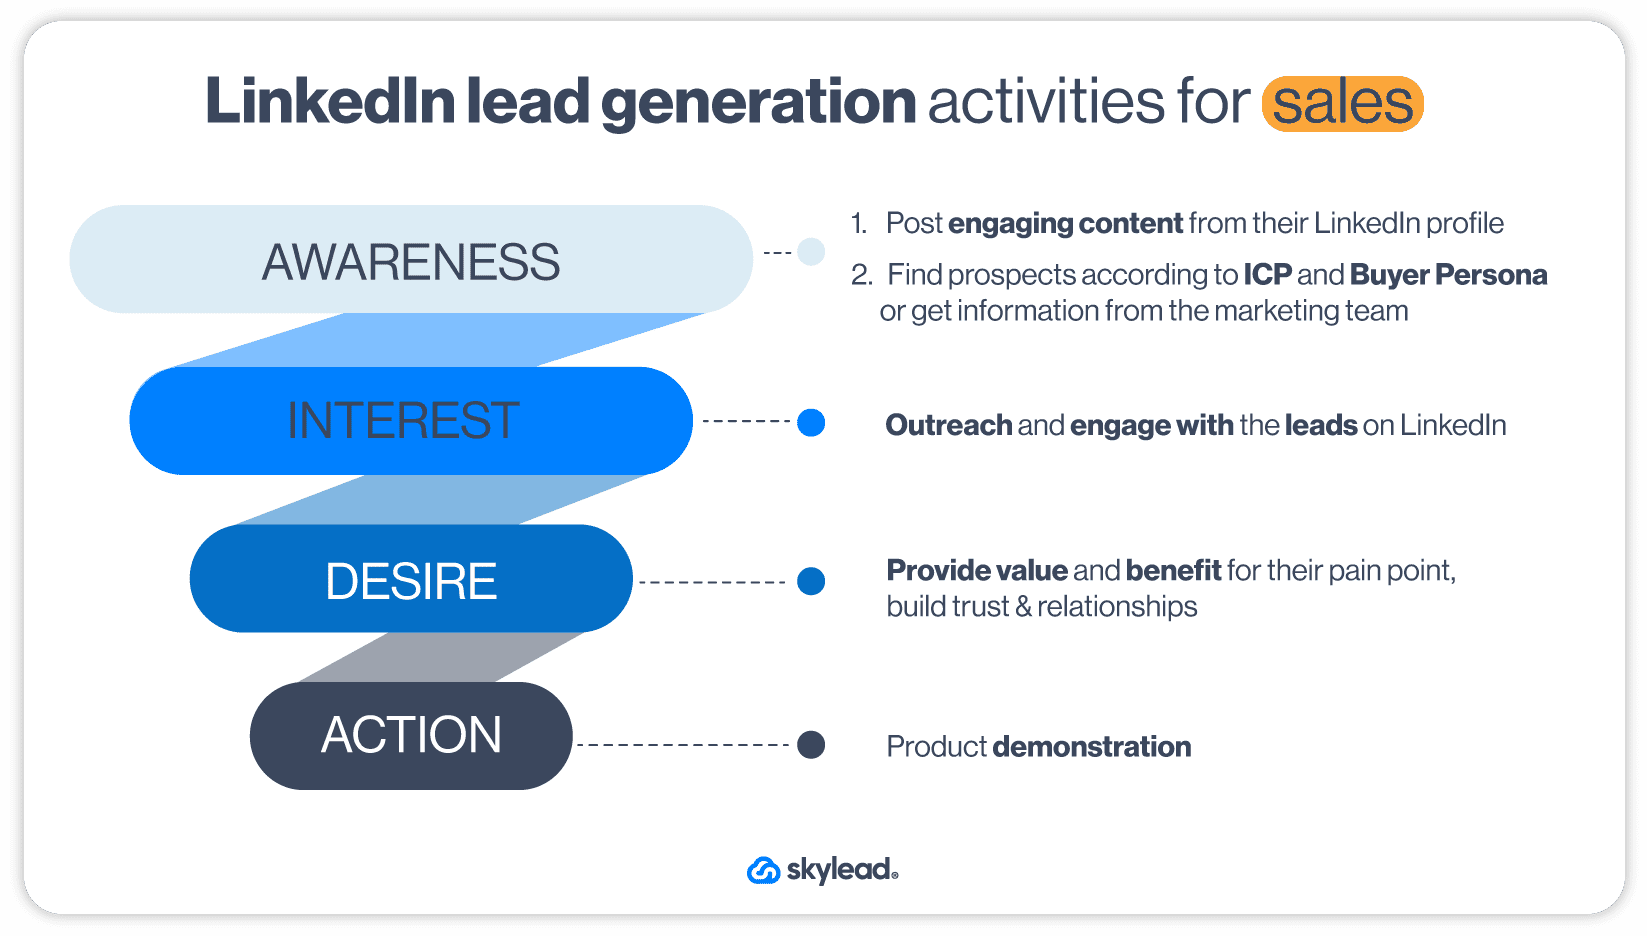 Image of LinkedIn lead generation funnel activities for sales